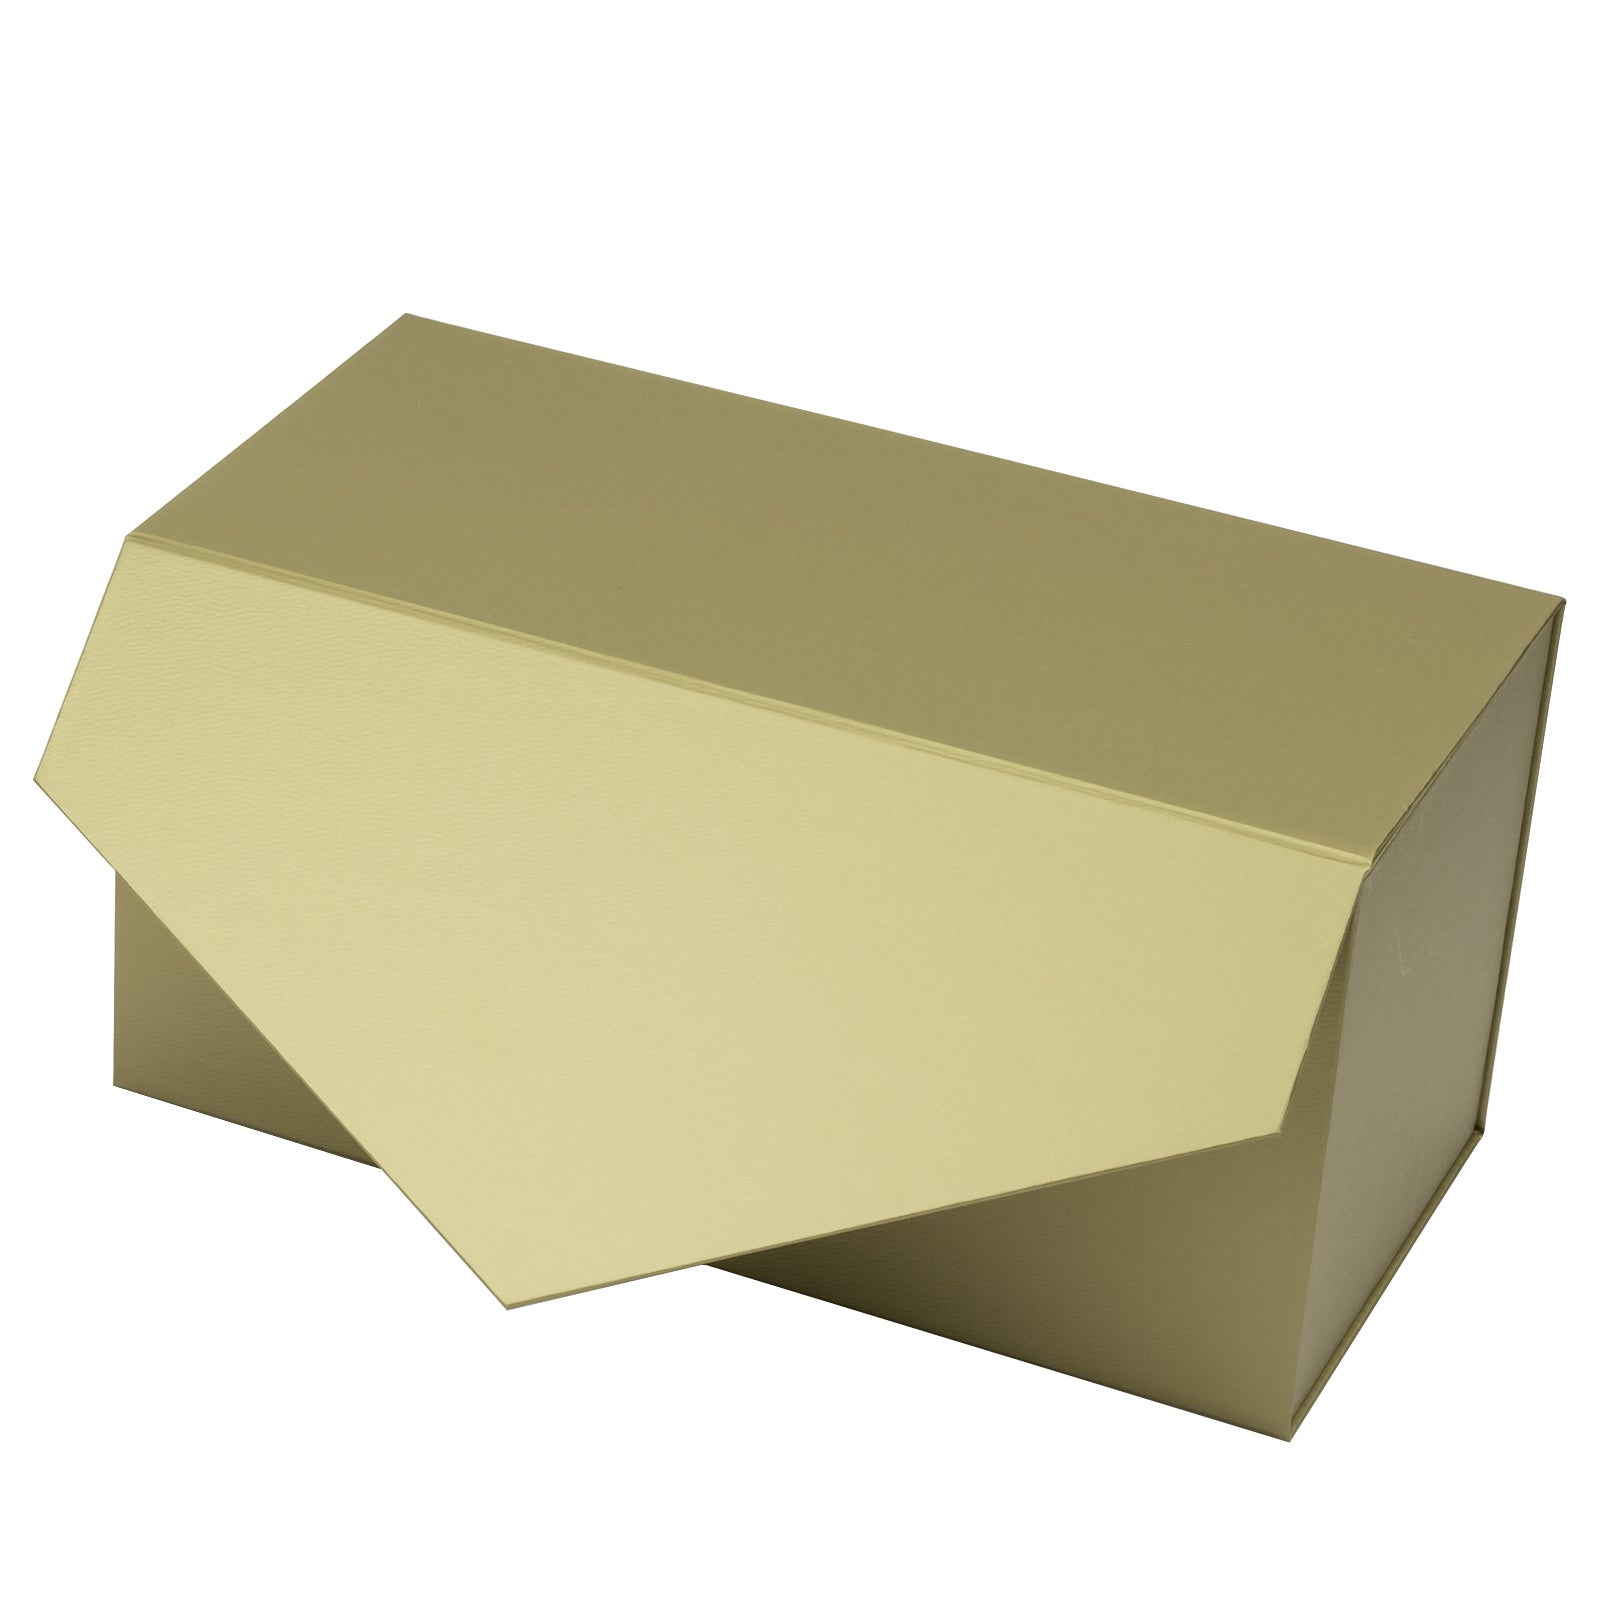 12x6x6 inch Collapsible Gift Box with Magnetic Closure